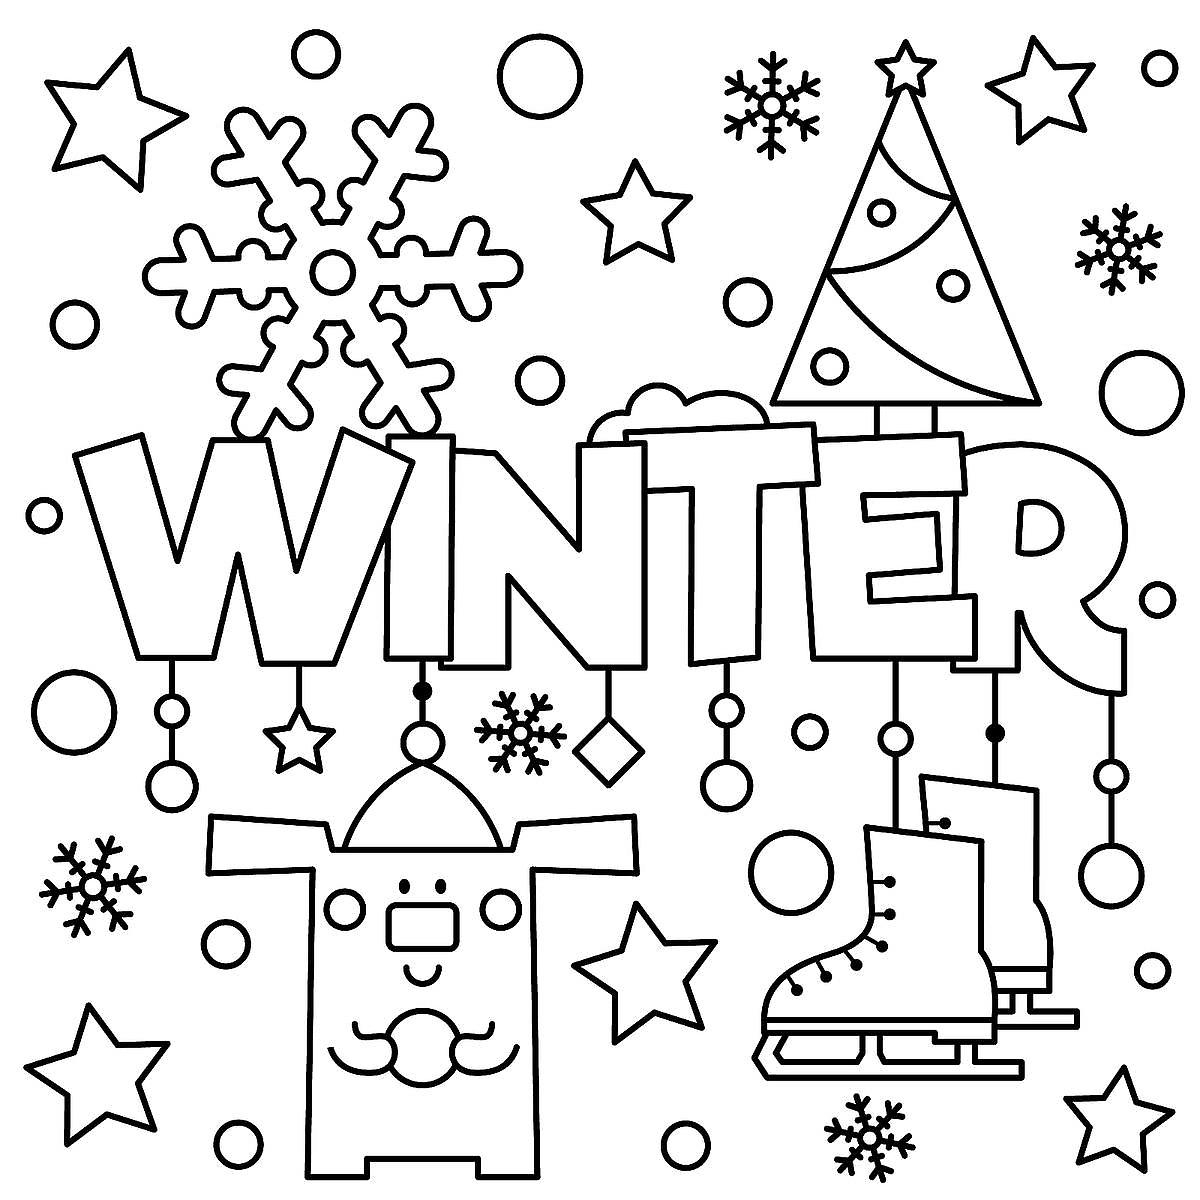 Winter Coloring Pages Printable Coloring Pages Free Winter Wallpaper For Desktoporing Sheets